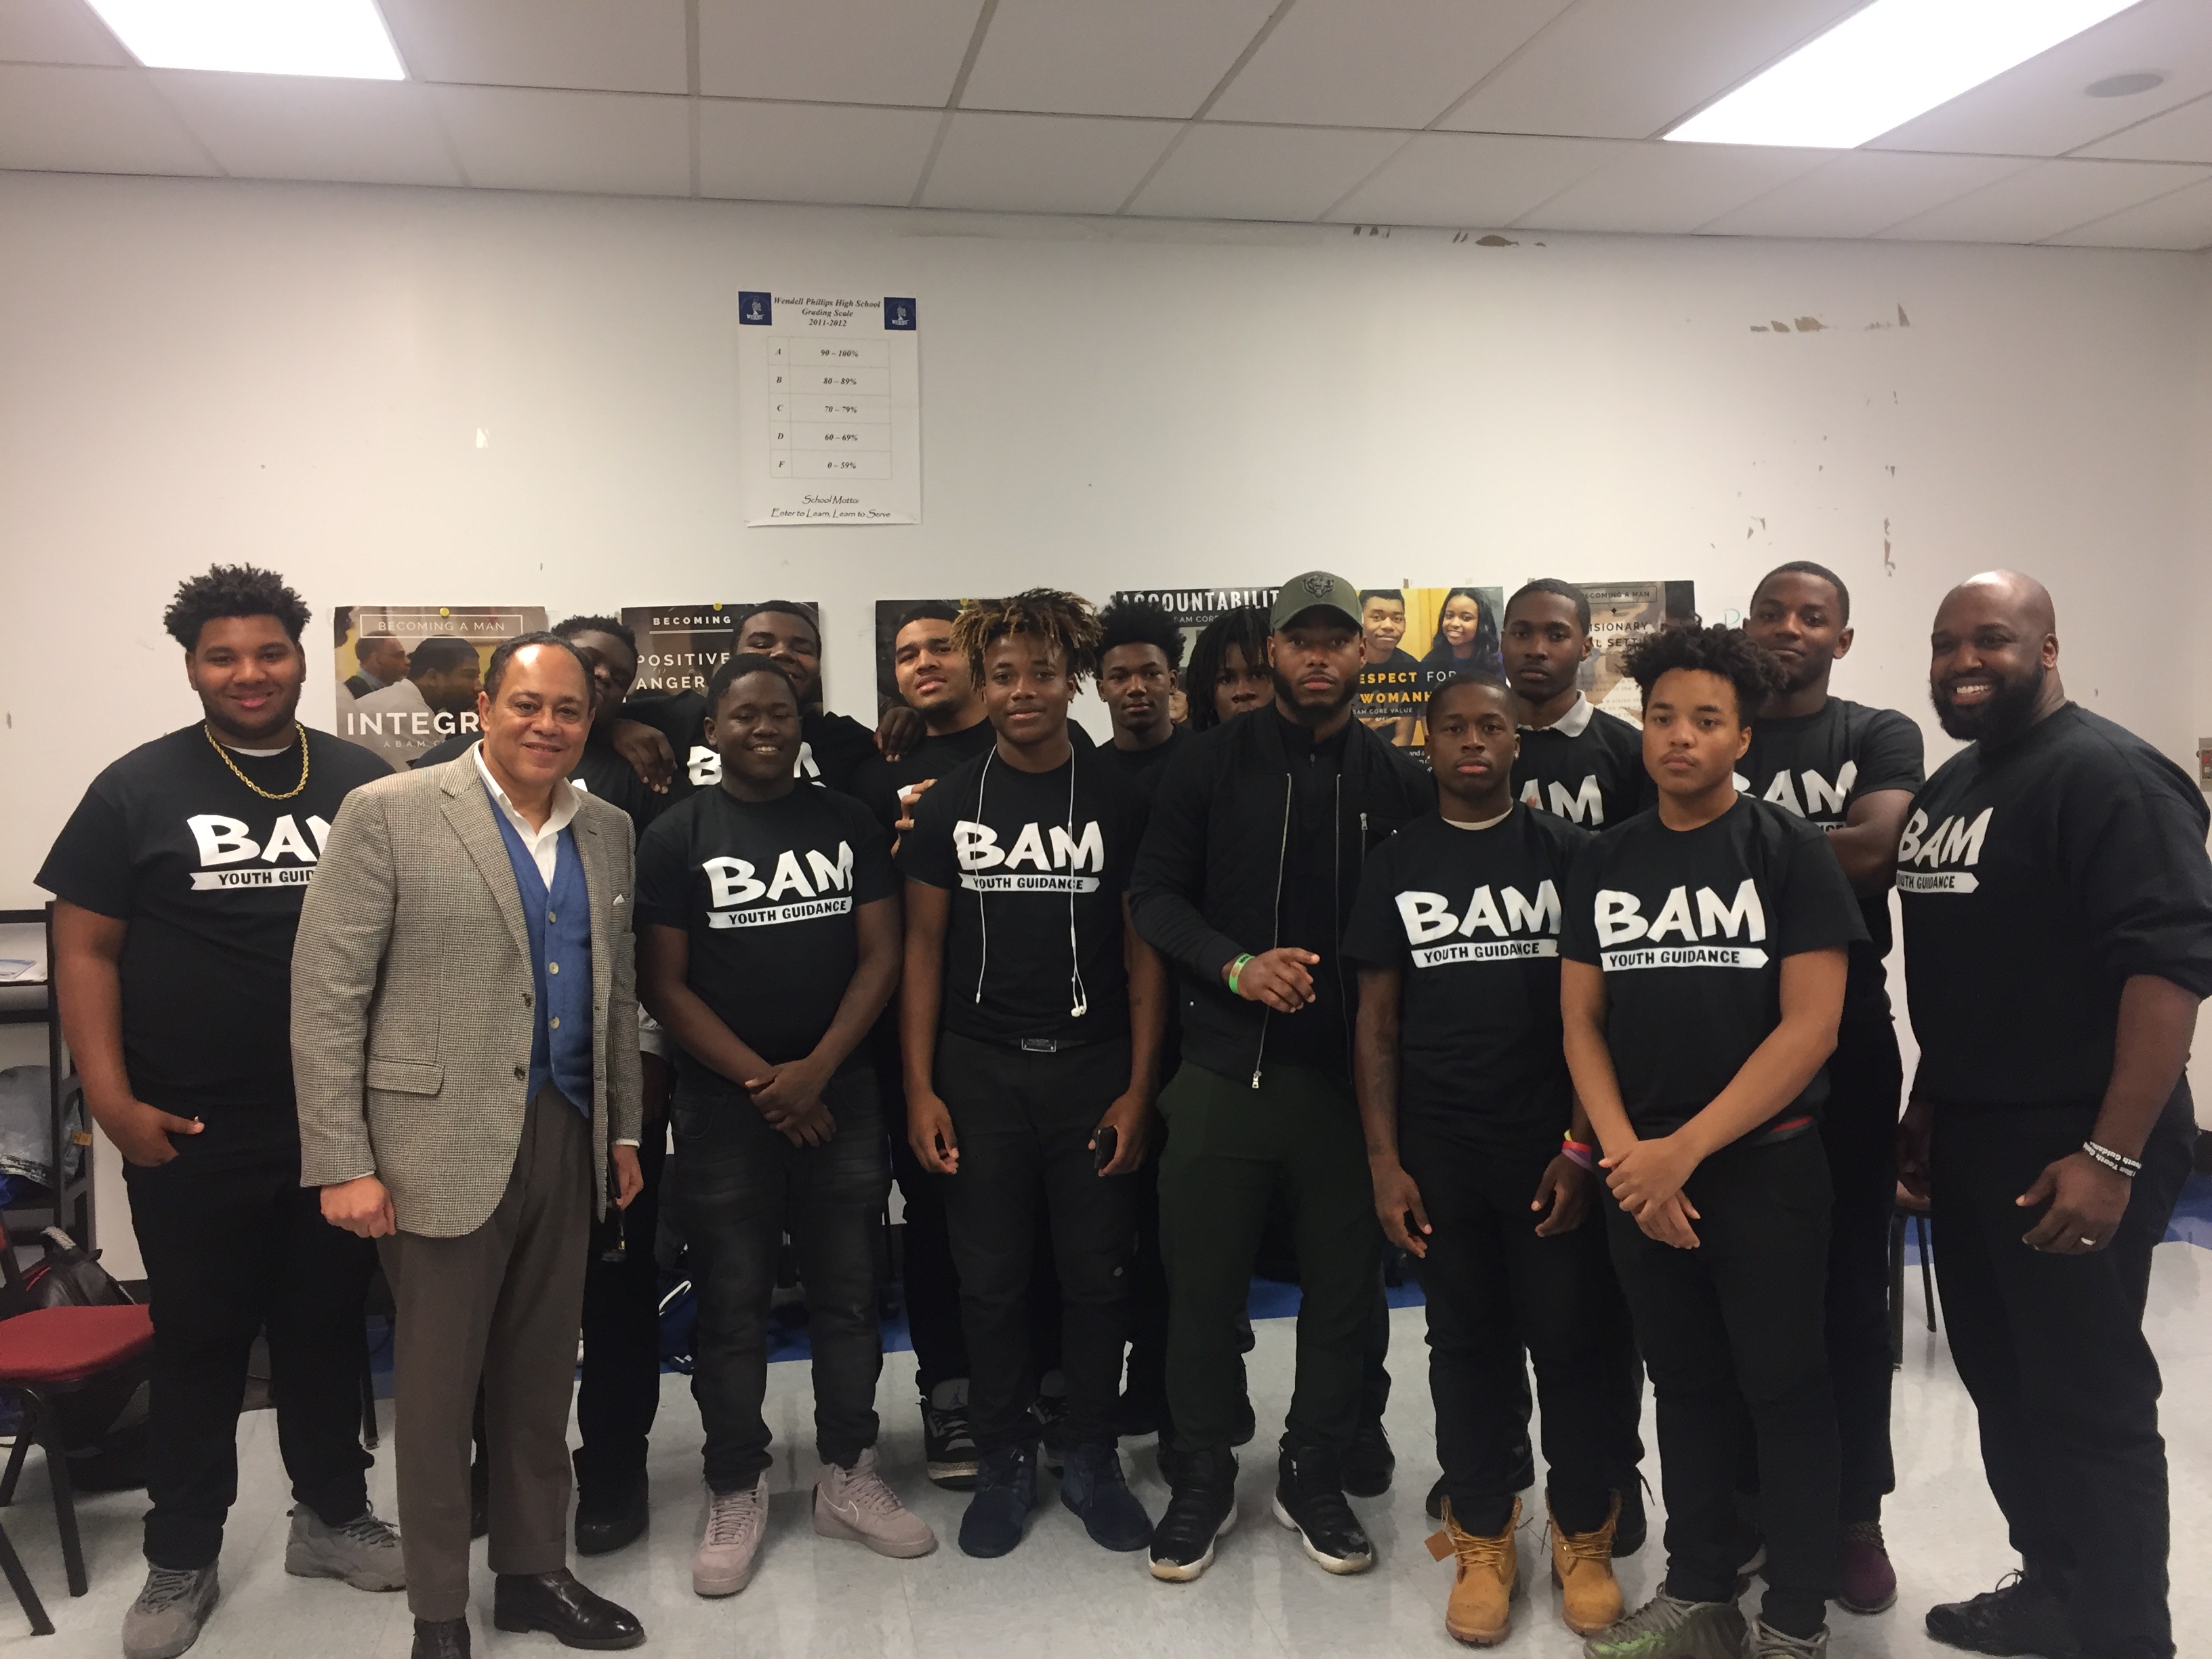 Julian and NFL Safety Adrian Amos (Bears, Packers) share a moment with participants of Chicago-based youth anti-violence program Becoming a Man (BAM)